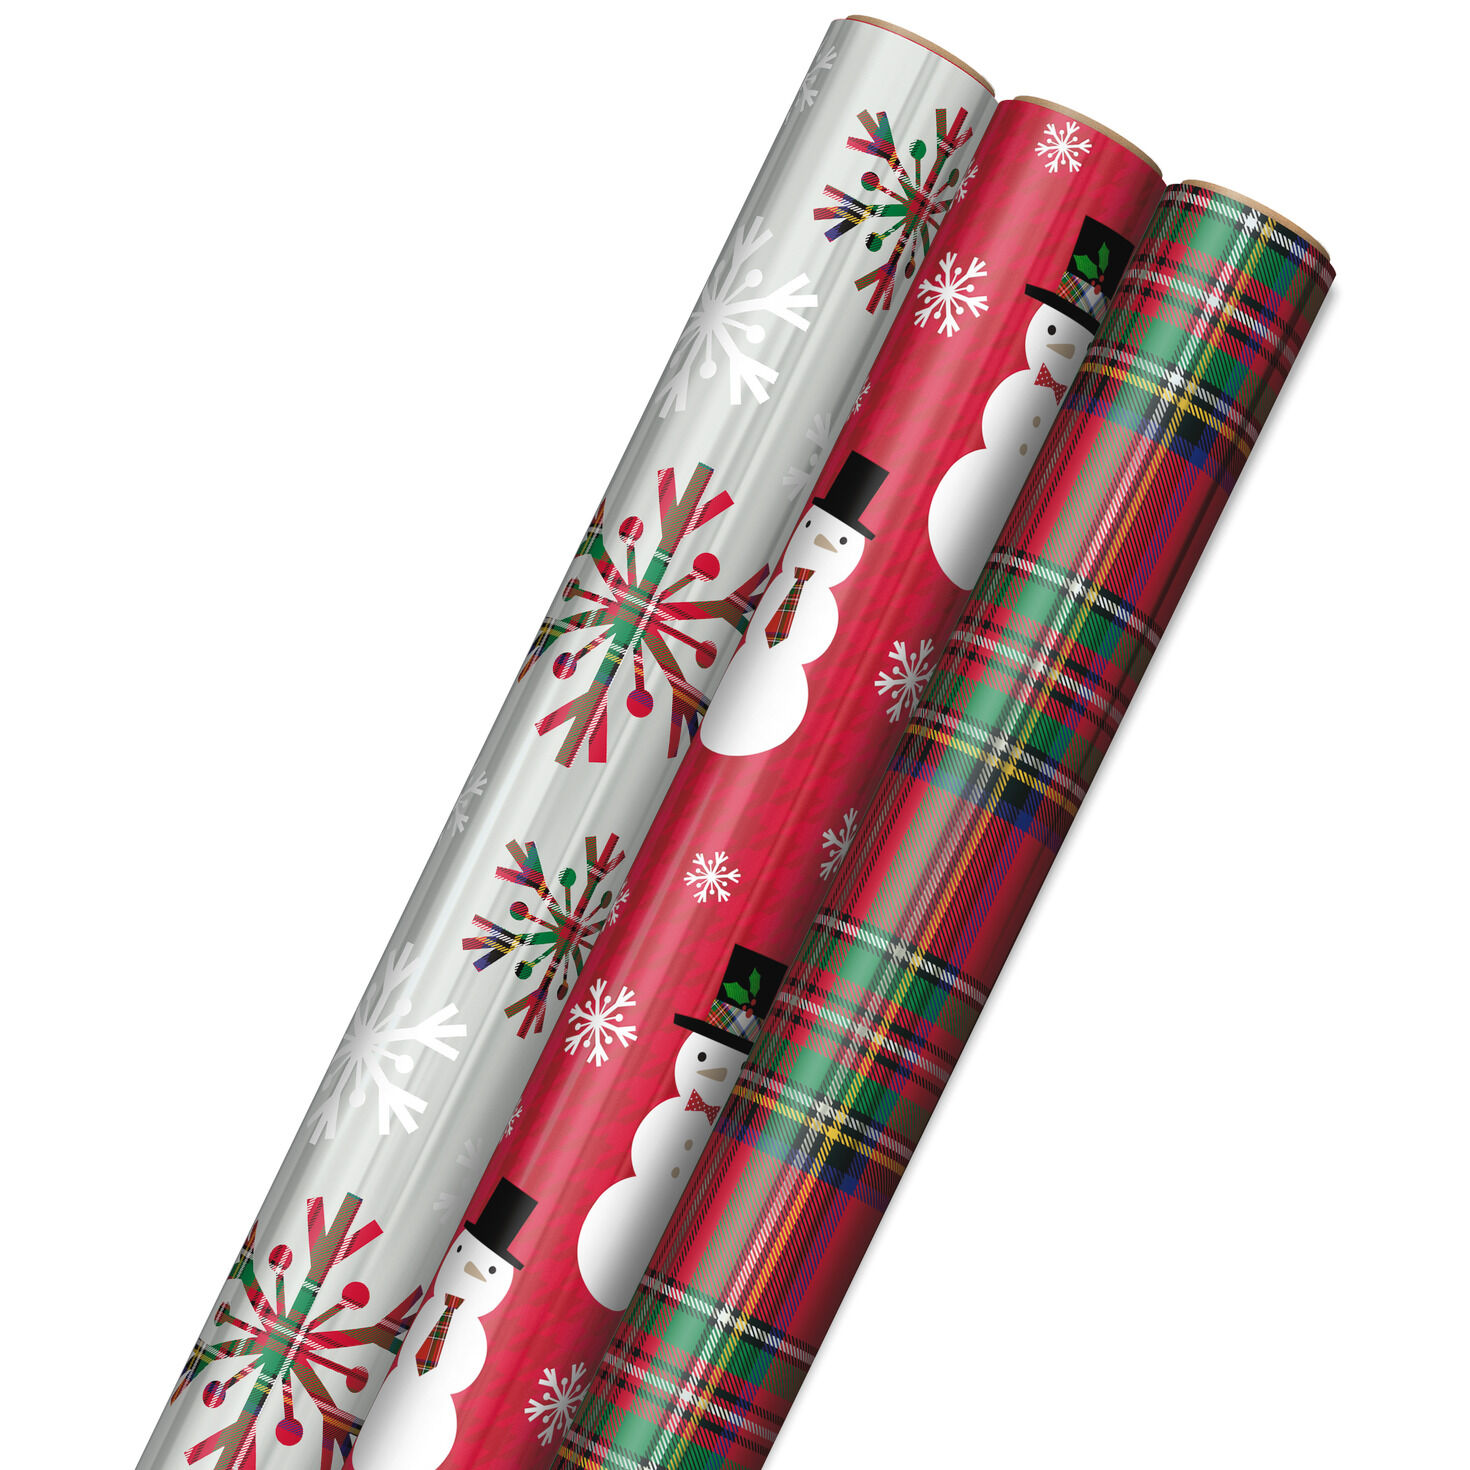 Harry Potter Holiday Wrapping Paper Christmas Gift Wrap - 70 sq. ft.